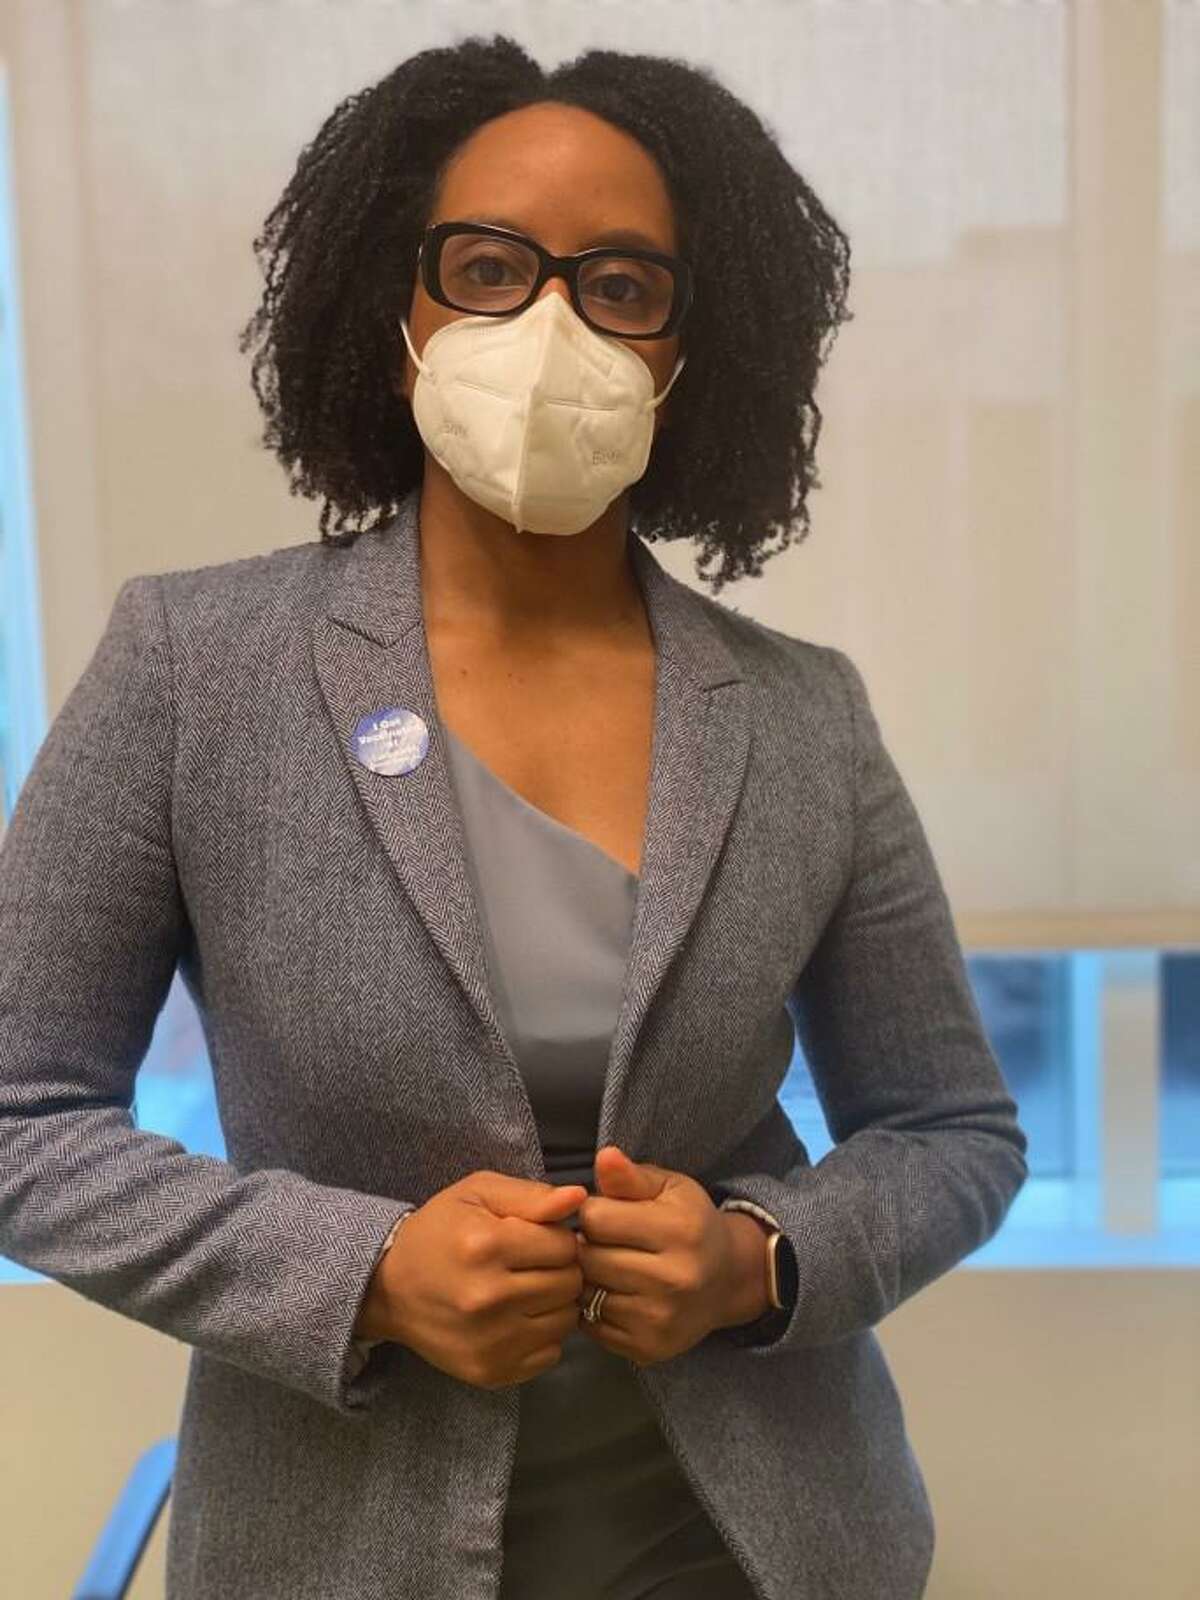 Dr. Tichianaa Armah is a psychiatrist and Yale School of Medicine faculty member who directs mental health for Community Health Center Inc.  Armah hesitated to get the COVID-19 vaccine, initially fearful in part because of health inequities in the Black community.